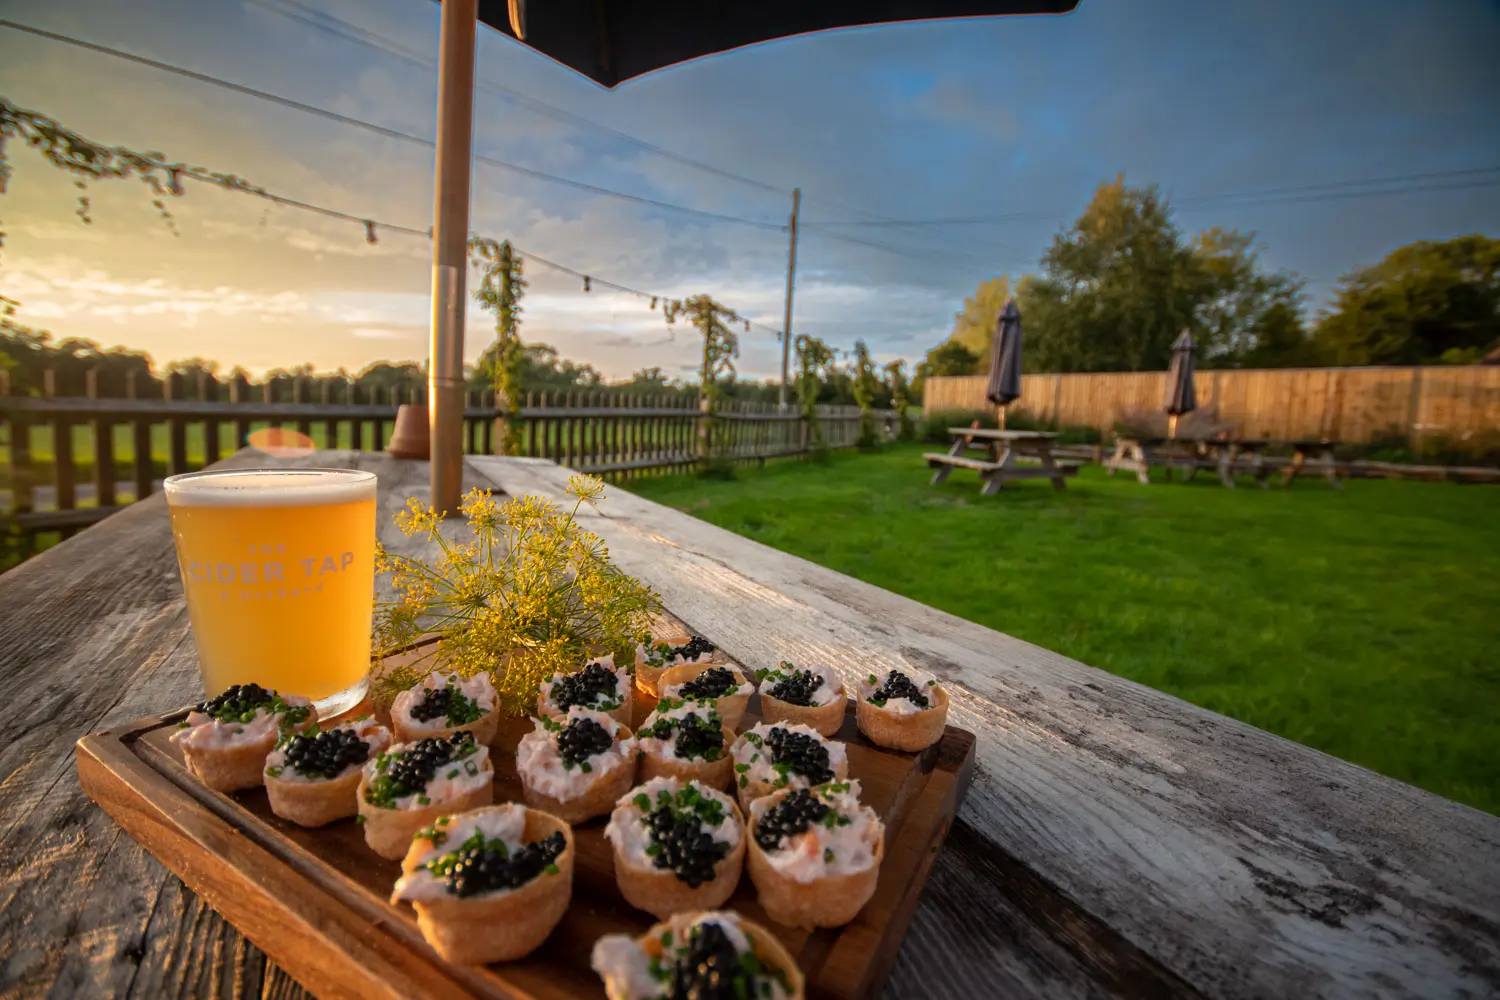 A promo photograph taken for a local business showing canapes and a pint of larger